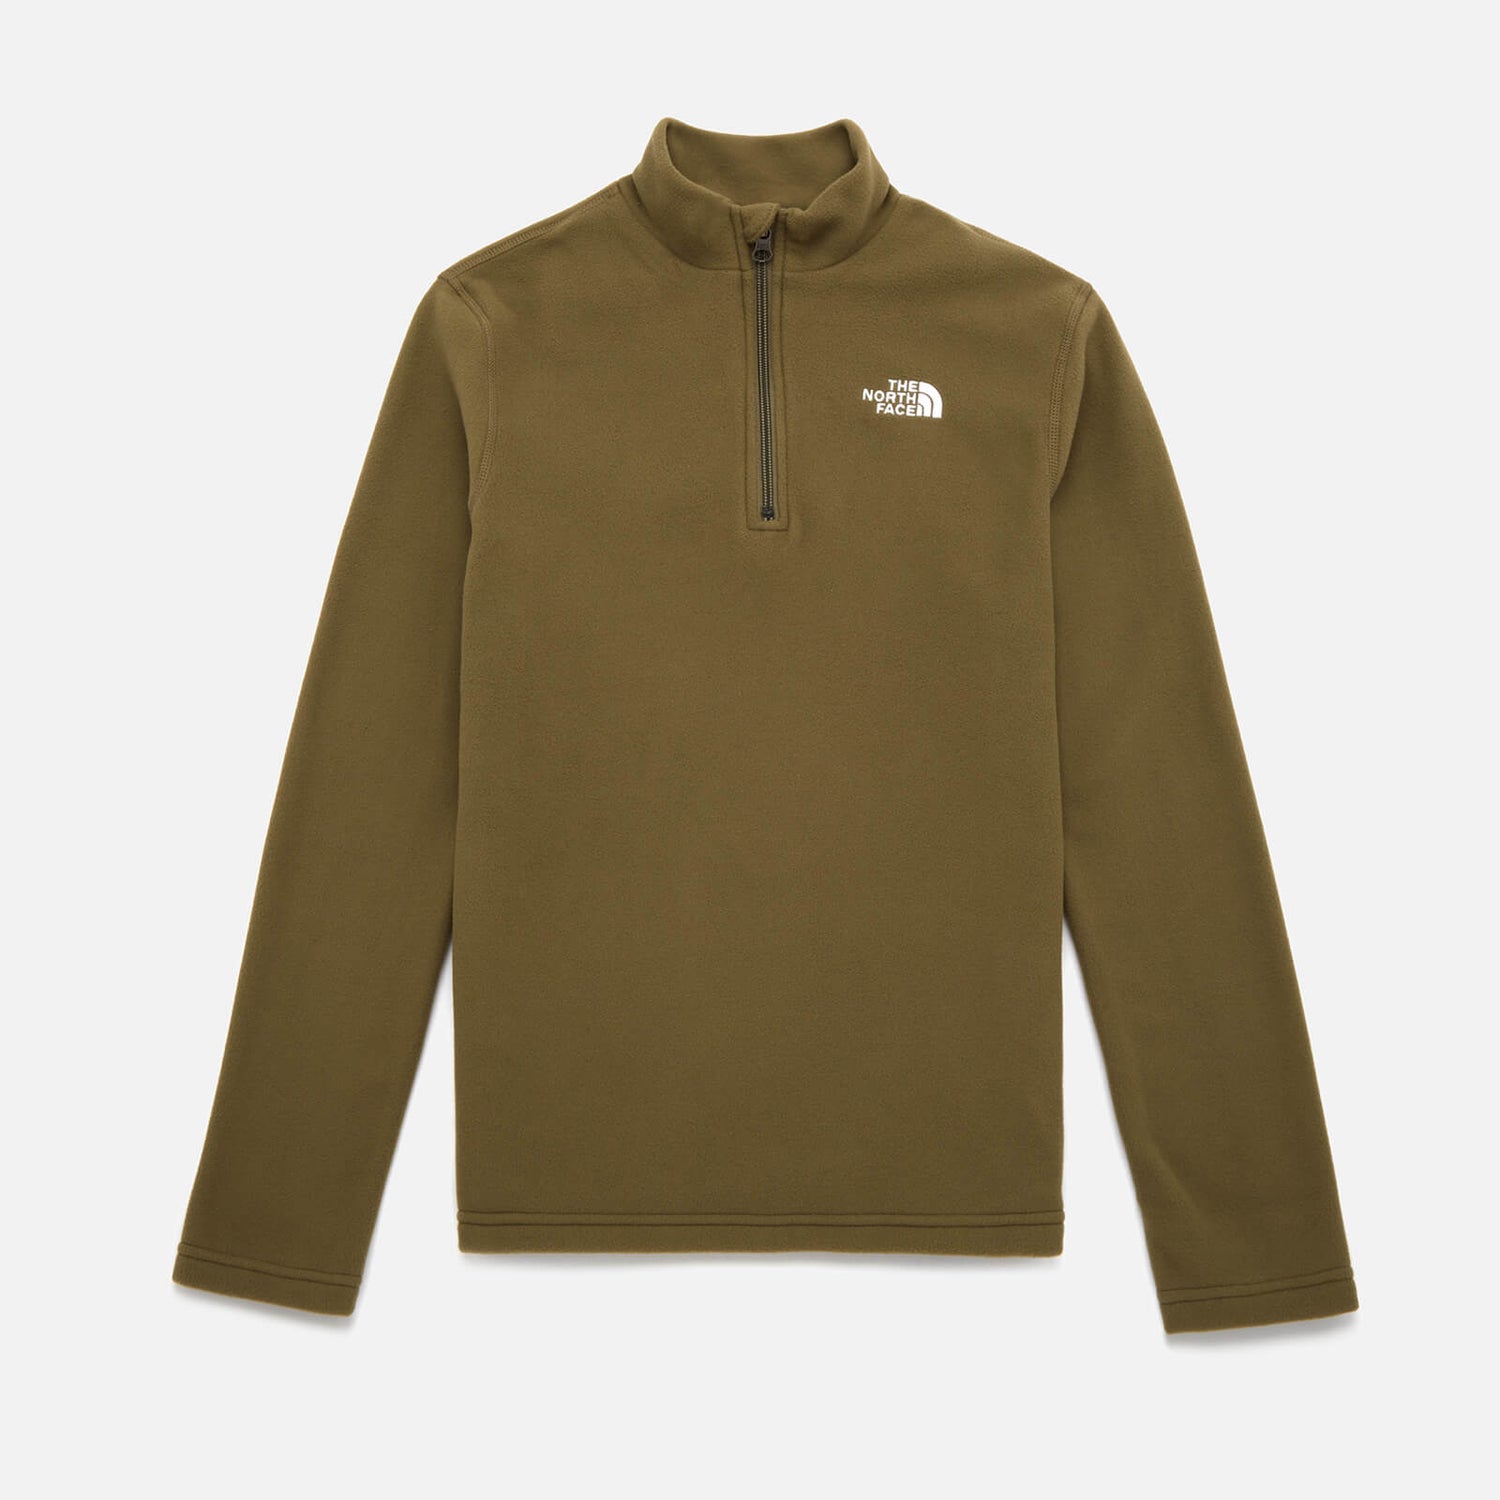 The North Face Boys' Youth Glacier Recycled 1/4 Zip Sweater - Khaki - 5-6 Years